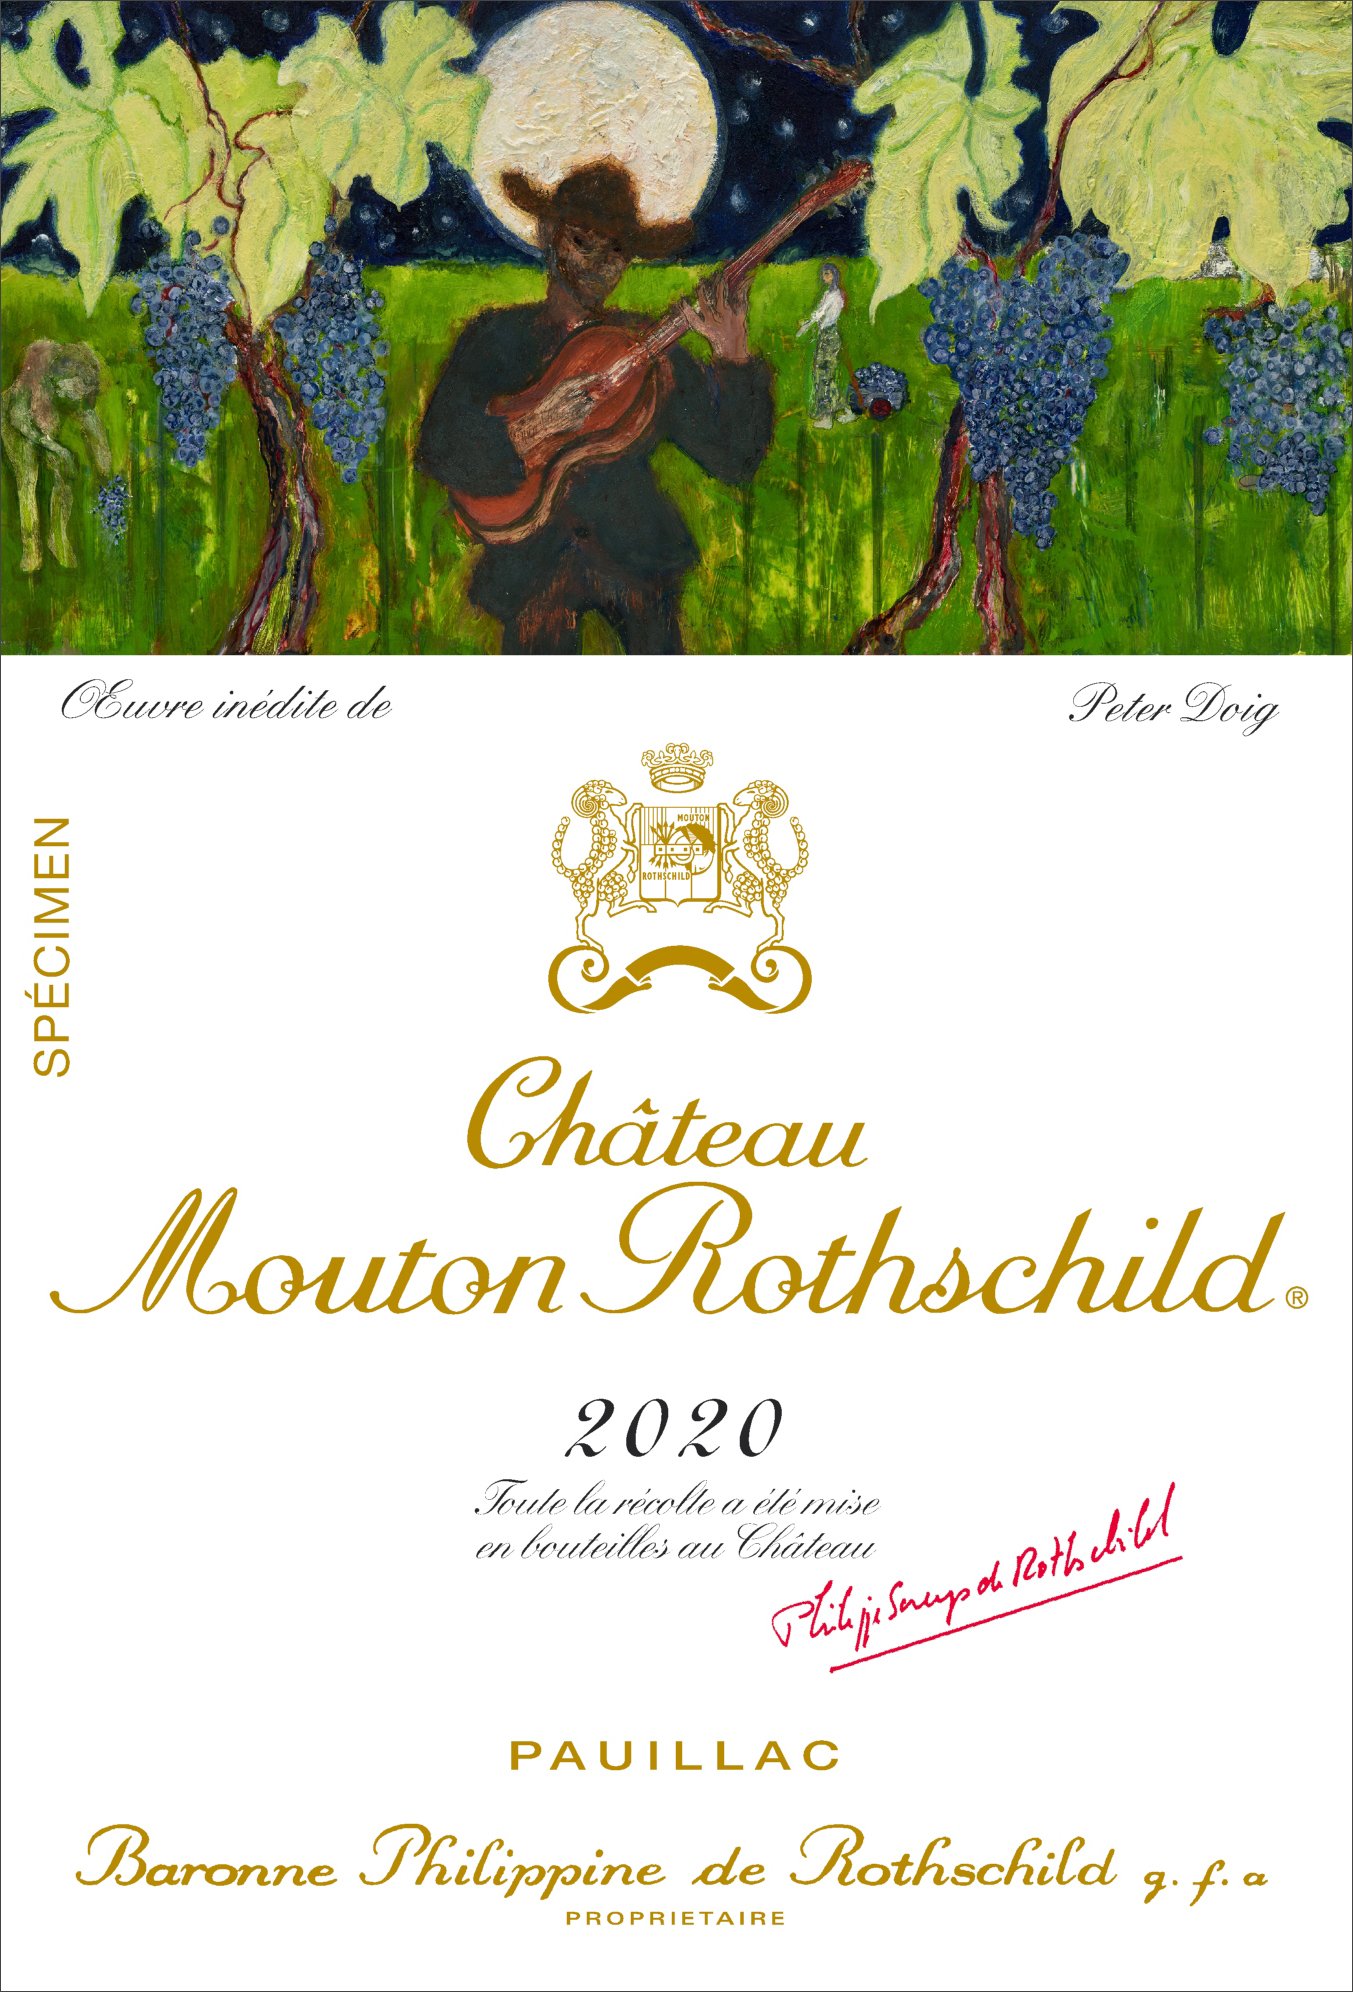 Peter Doig's label for Château Mouton Rothschild 2020 